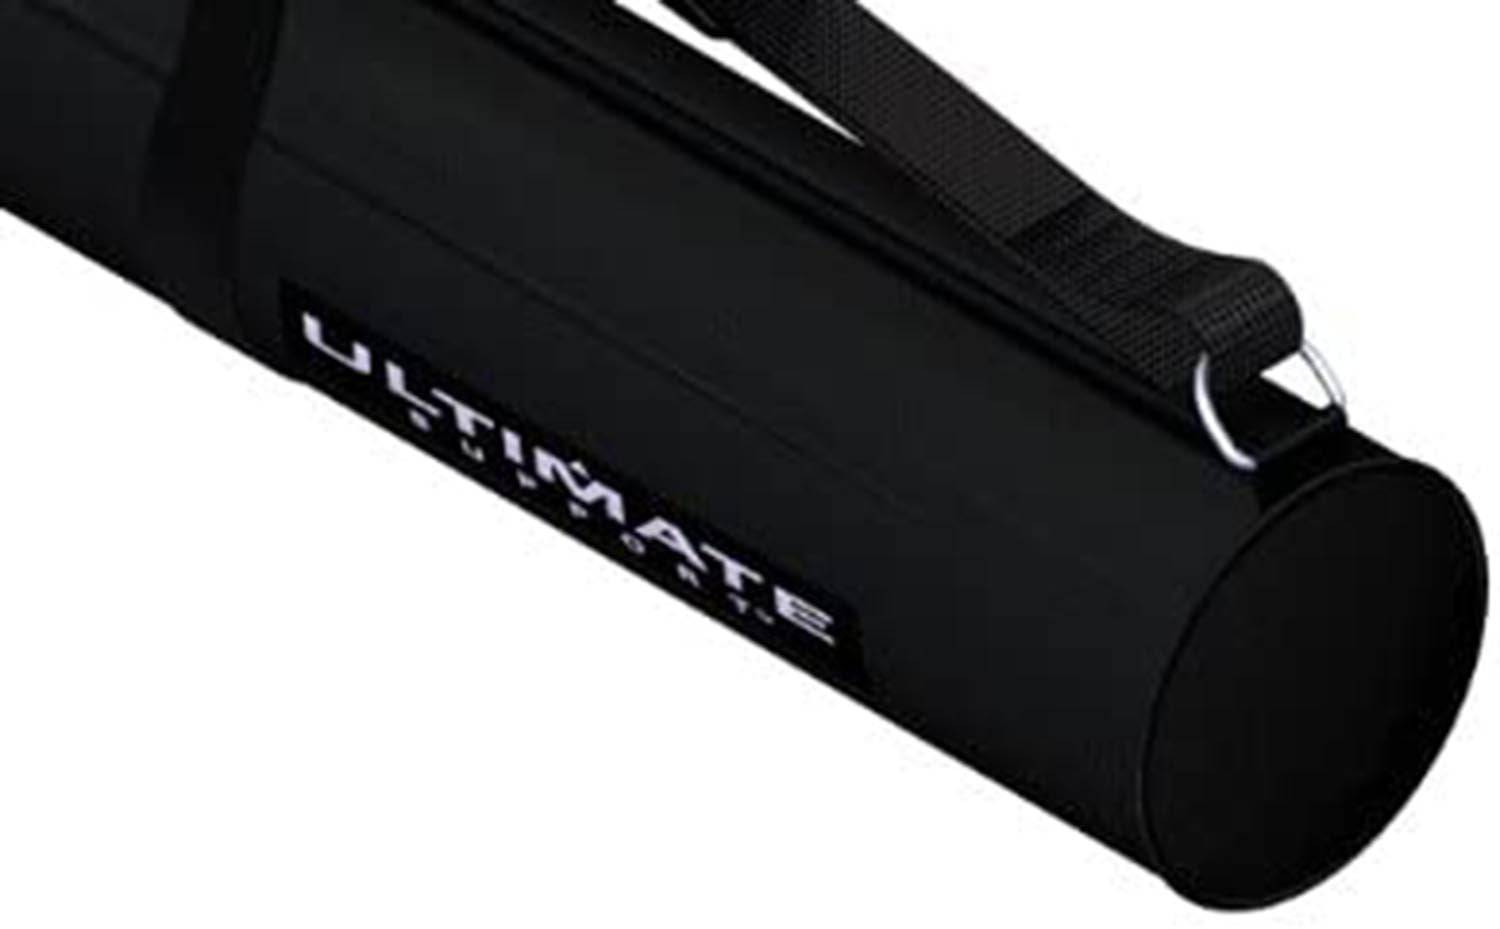 Ultimate Support Bag 99 Tote Bag For Extra Tall Speaker Stand - Hollywood DJ